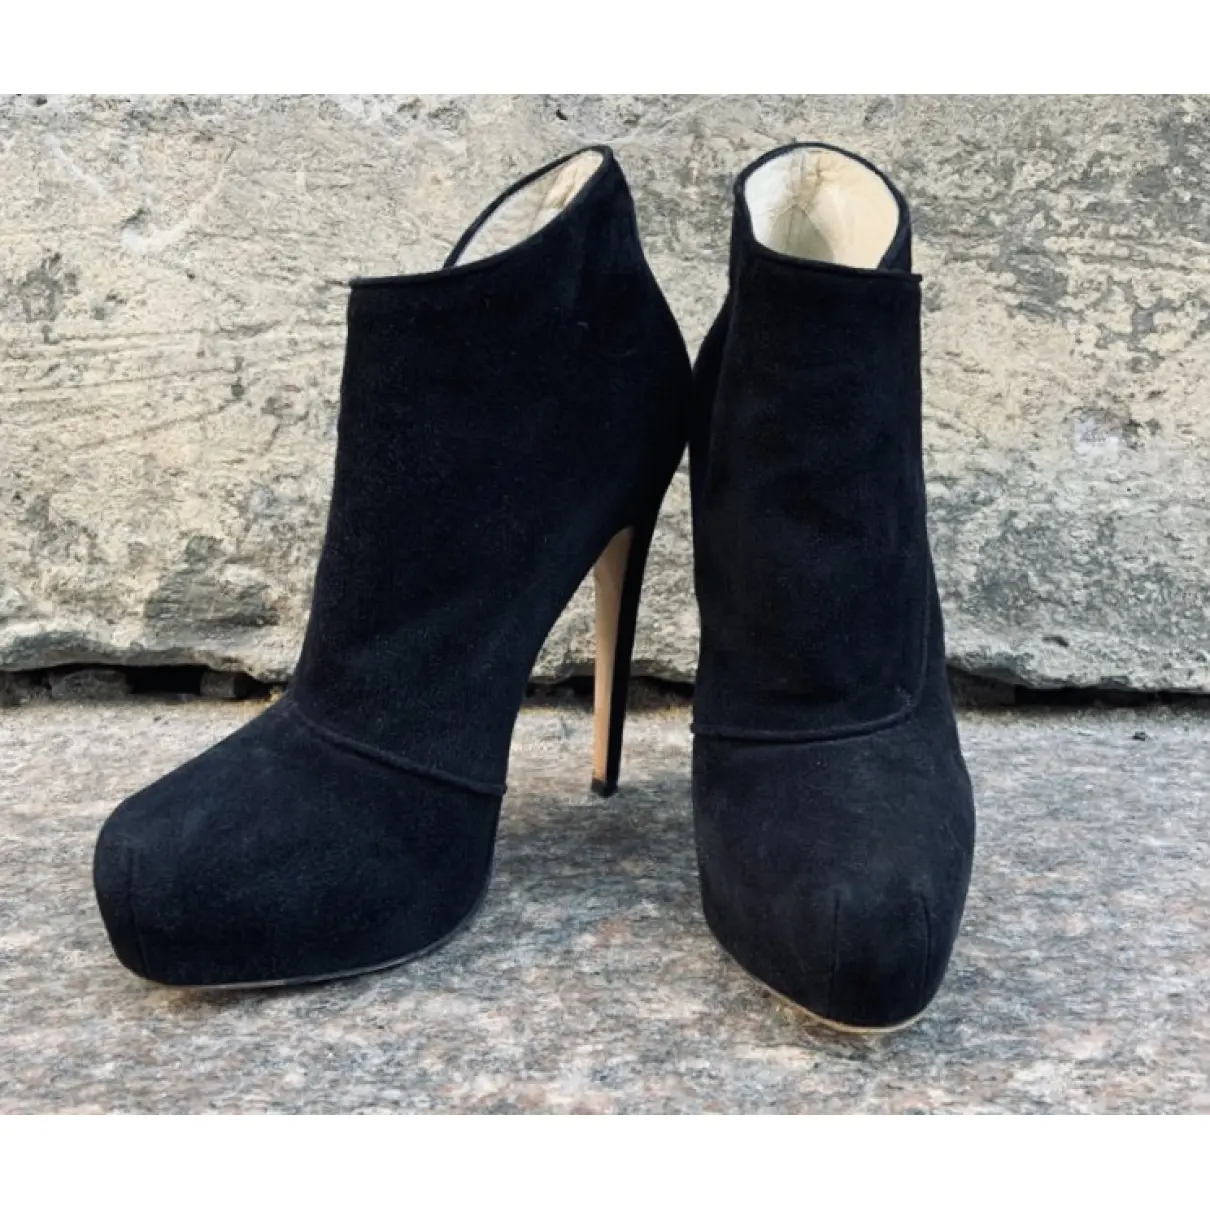 Luxury Brian Atwood Ankle boots Women